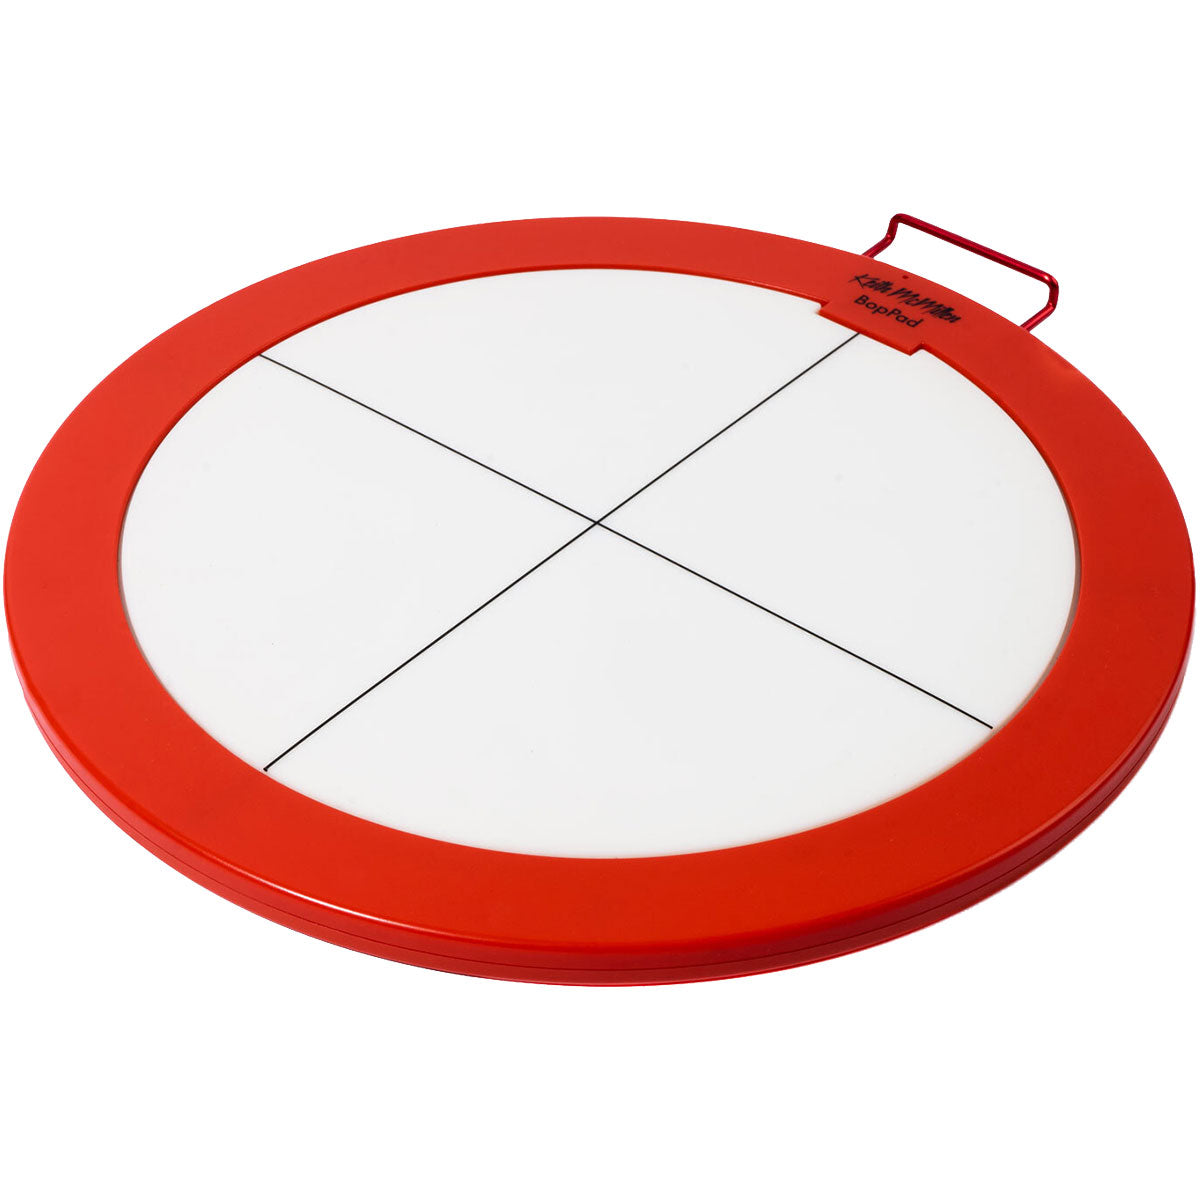 Keith McMillen Instruments BopPad Red USB-C Smart Fabric Drum Pad View 4